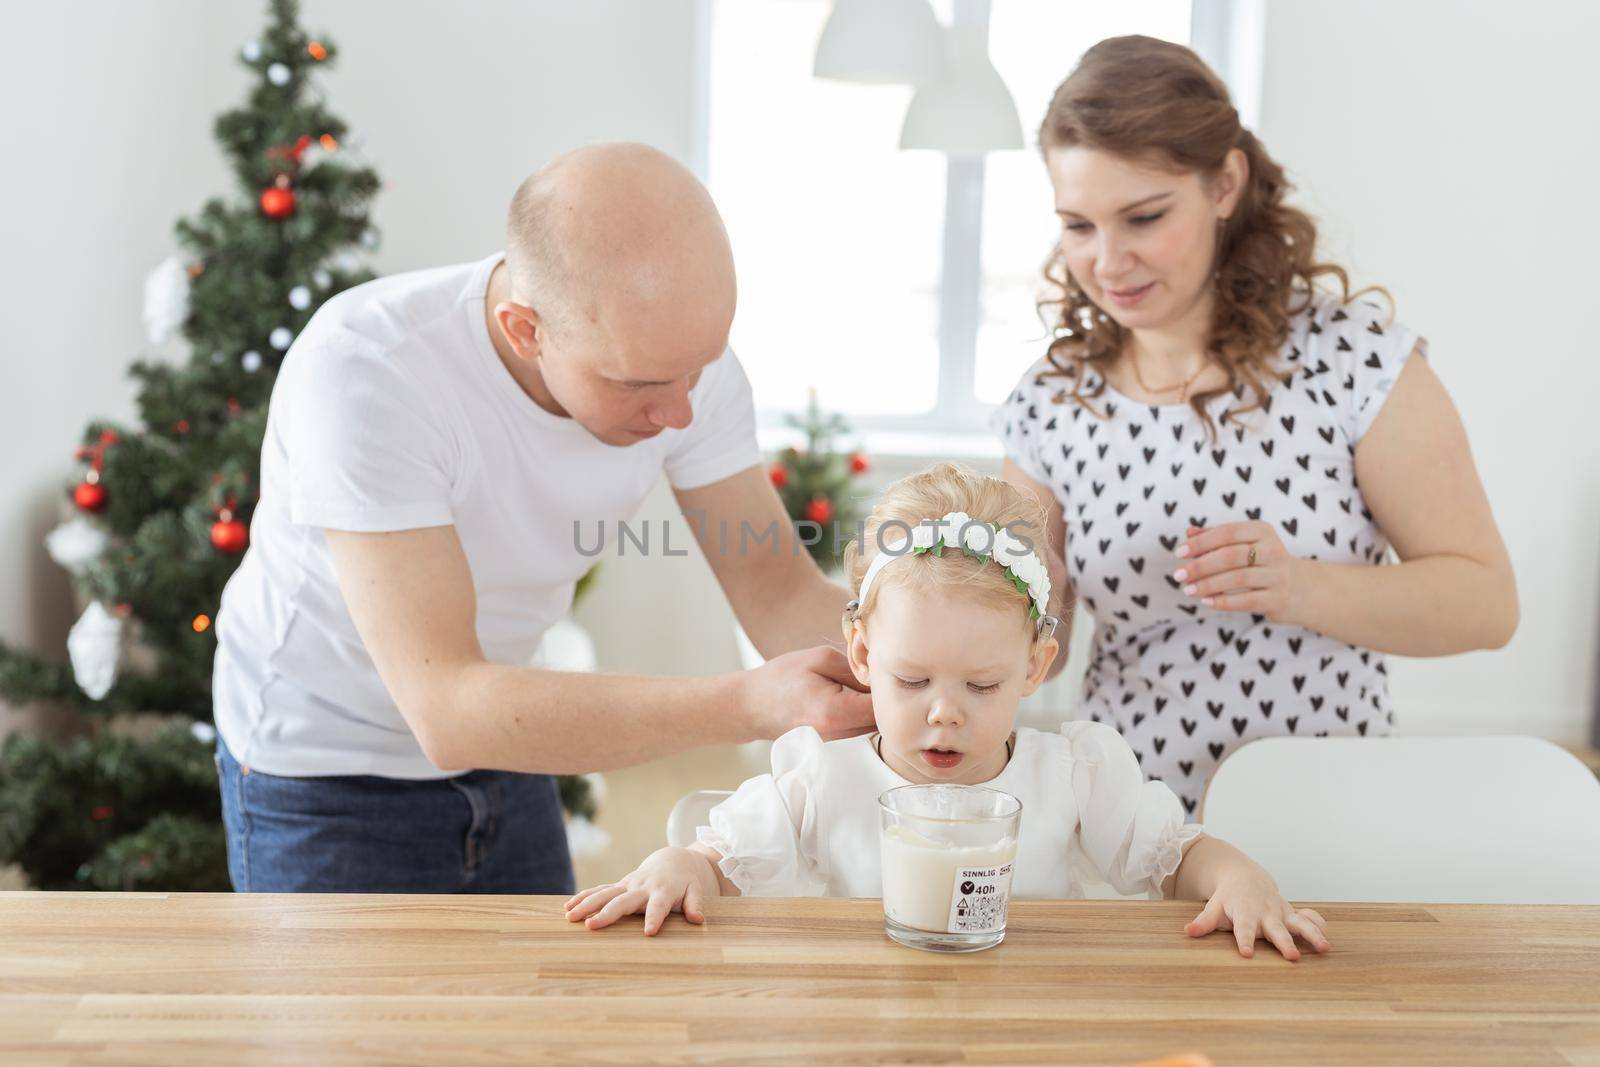 Mother and father helps to put on cochlear implant for their deaf baby daughter in christmas living room. Hearing aid and innovating medical technologies treatment deafness concept by Satura86